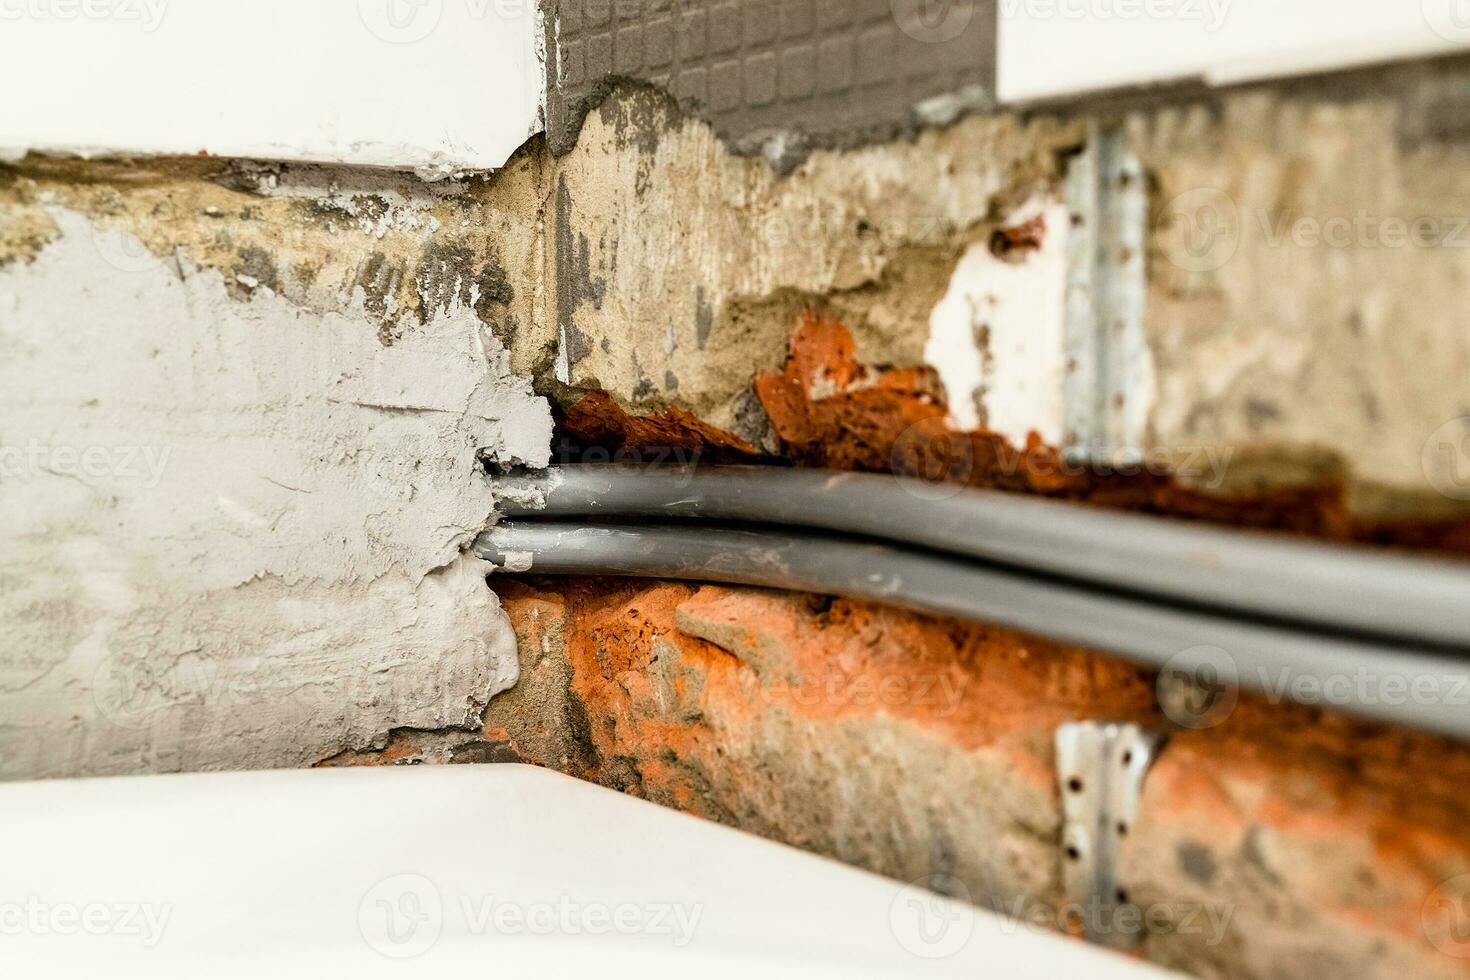 installation of plumbing pipes in chiseled wall photo